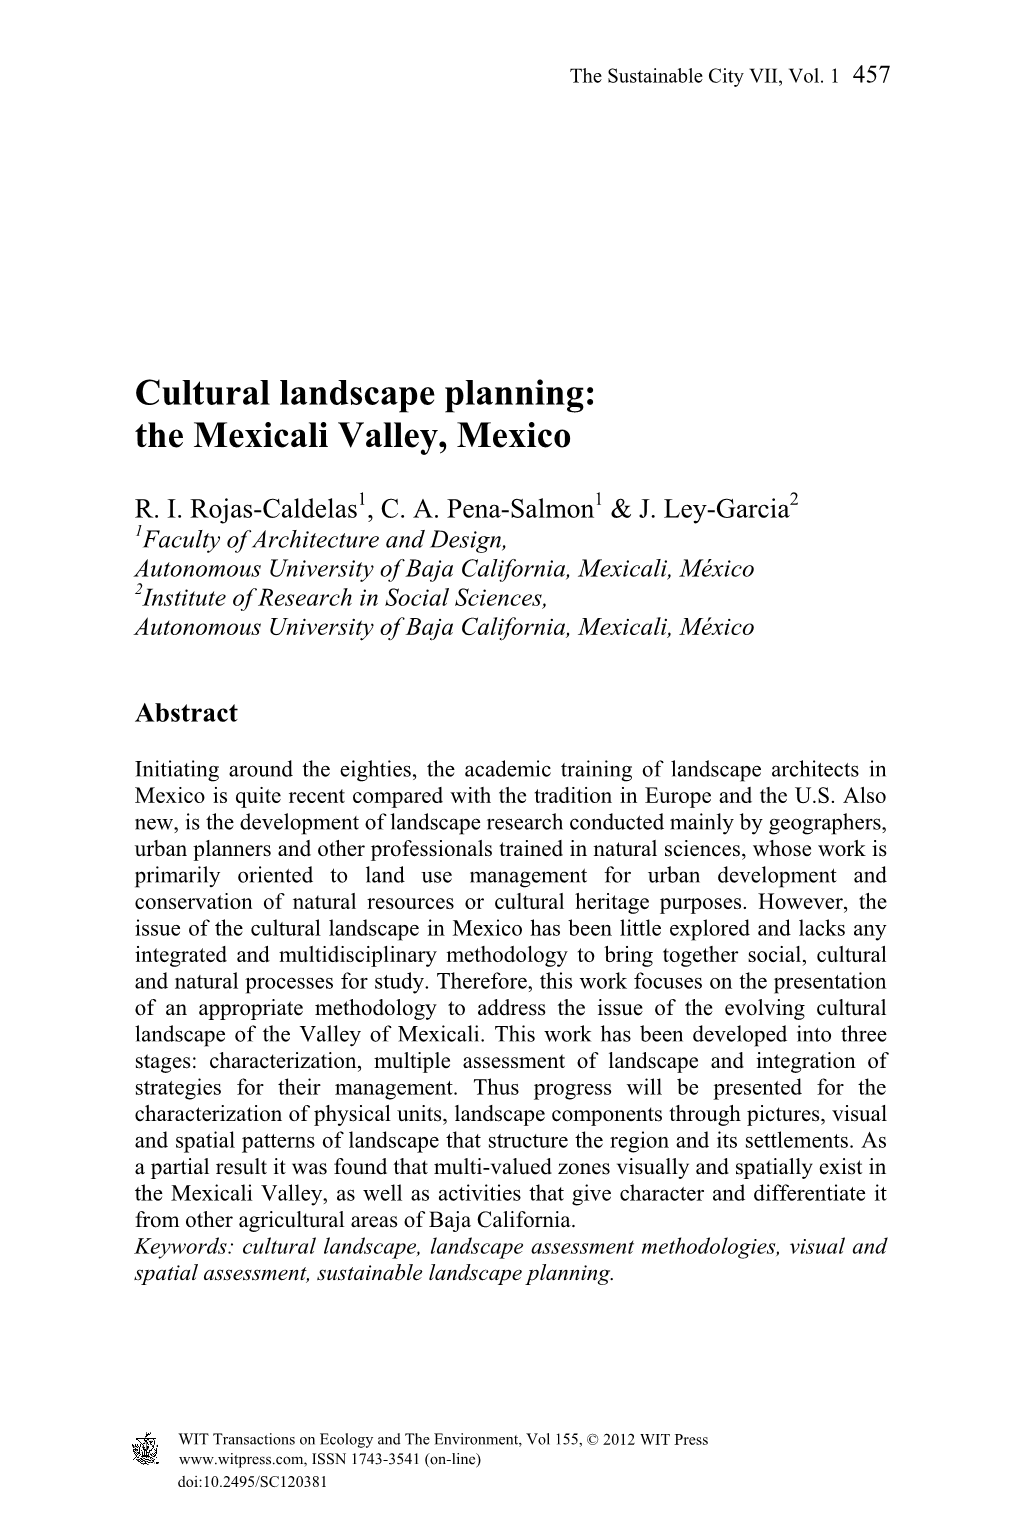 Cultural Landscape Planning: the Mexicali Valley, Mexico